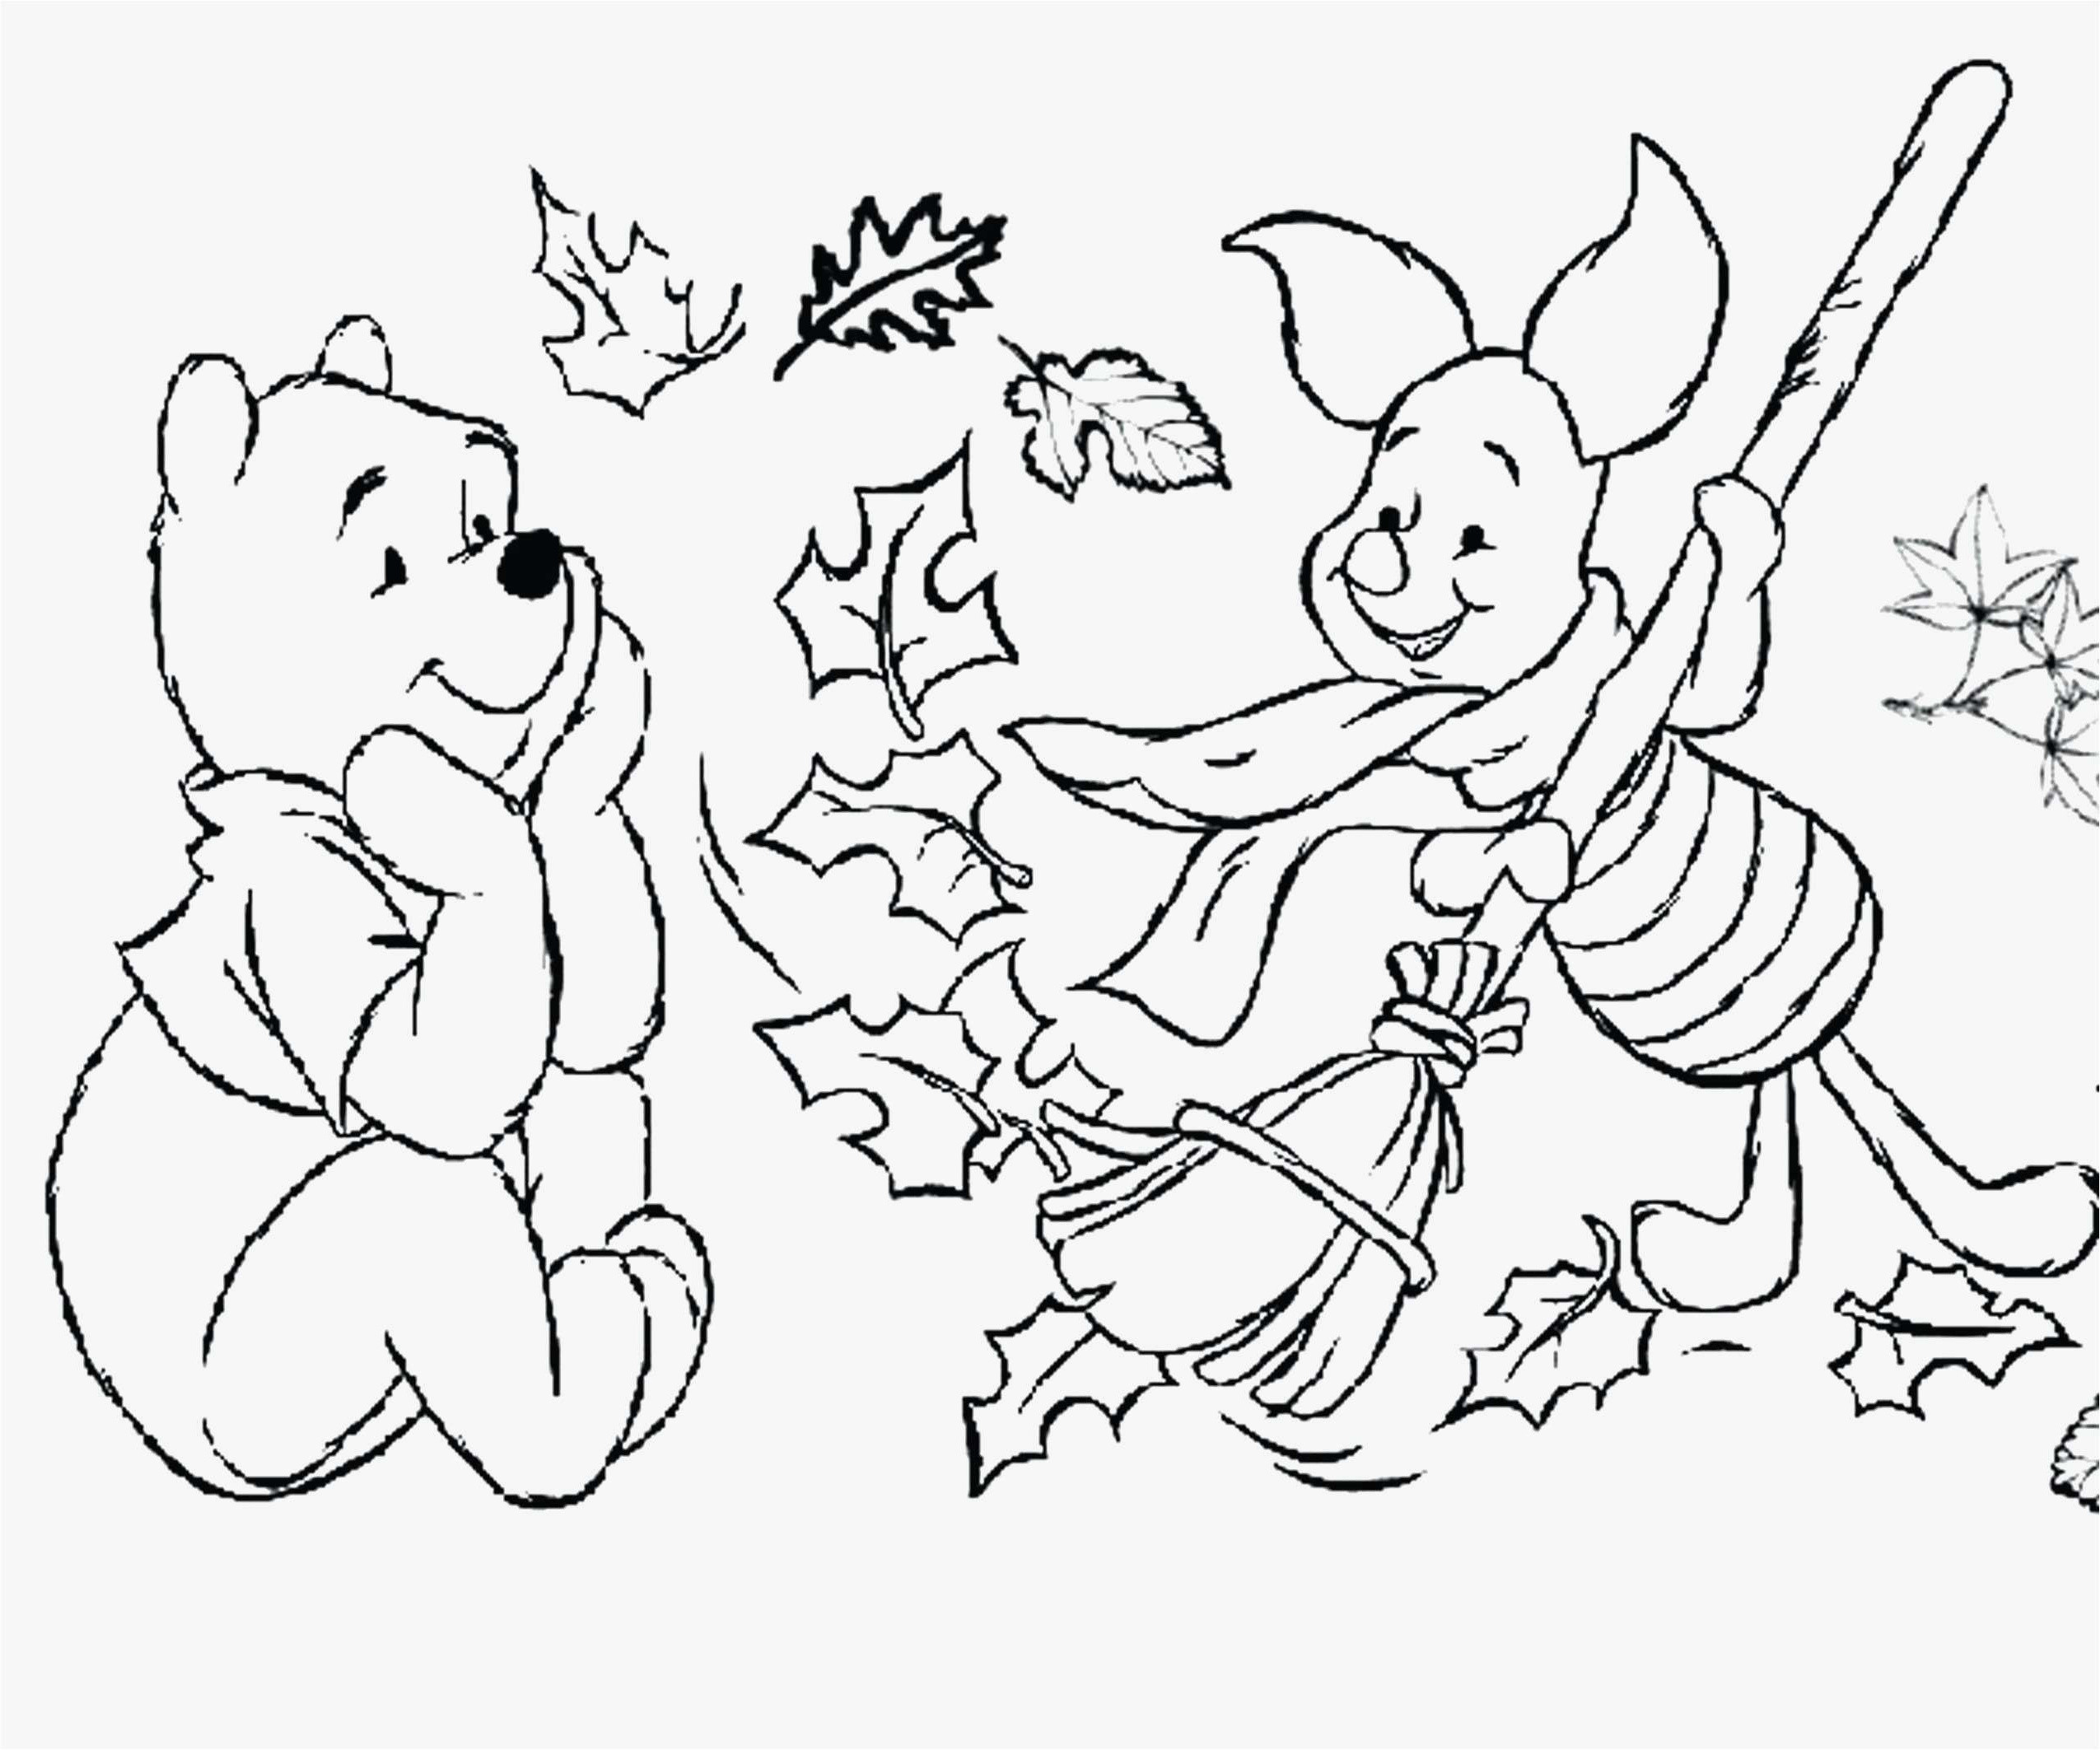 caterpillars coloring page new collection 27 jesus birth coloring pages free collection coloring sheets of caterpillars coloring page